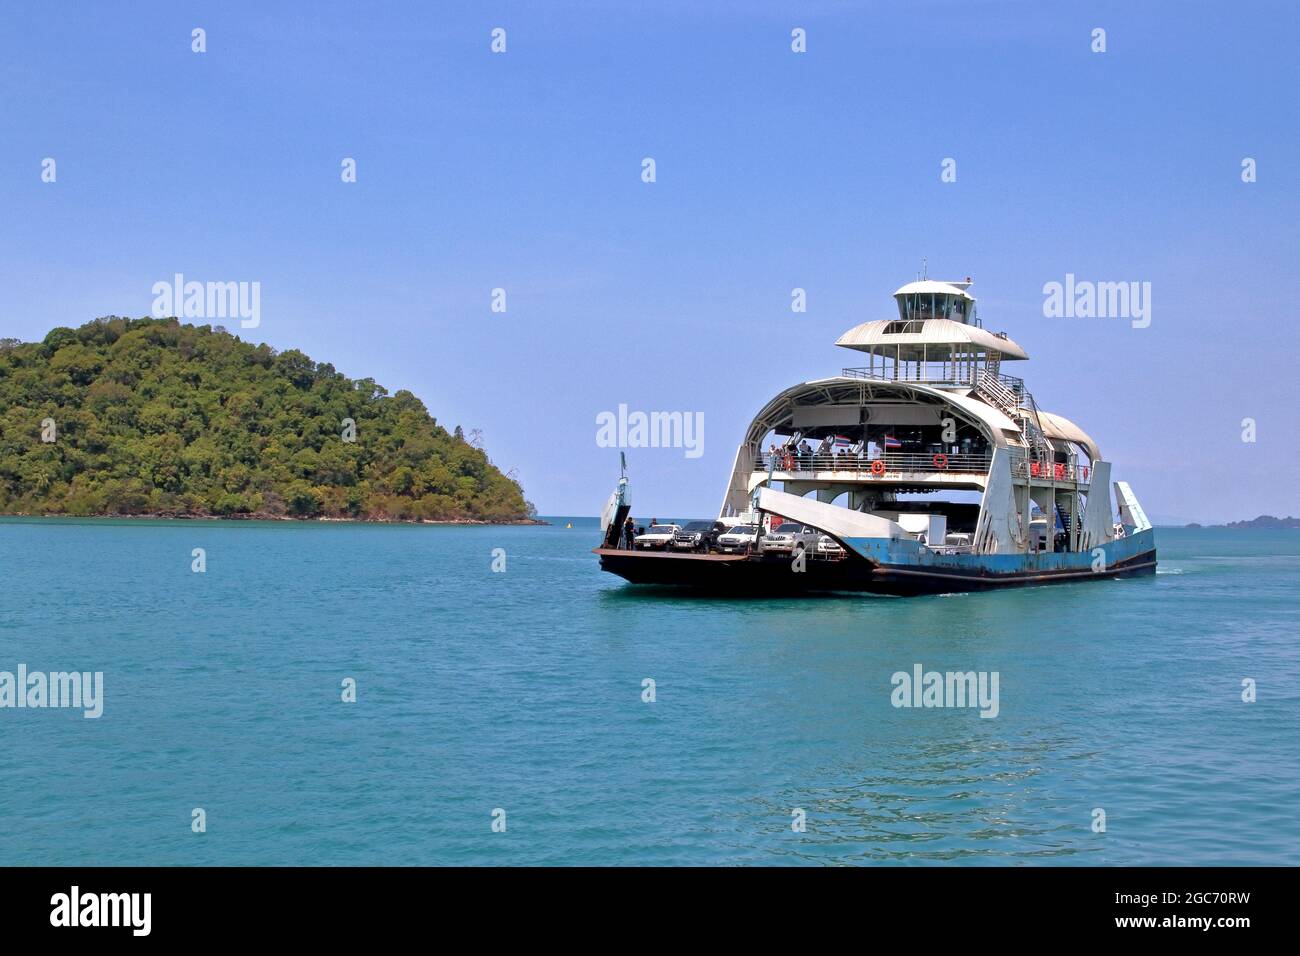 Ferry Boat Or Ship Of The Thai Island Koh Chang In Thailand Asia Stock Photo Alamy